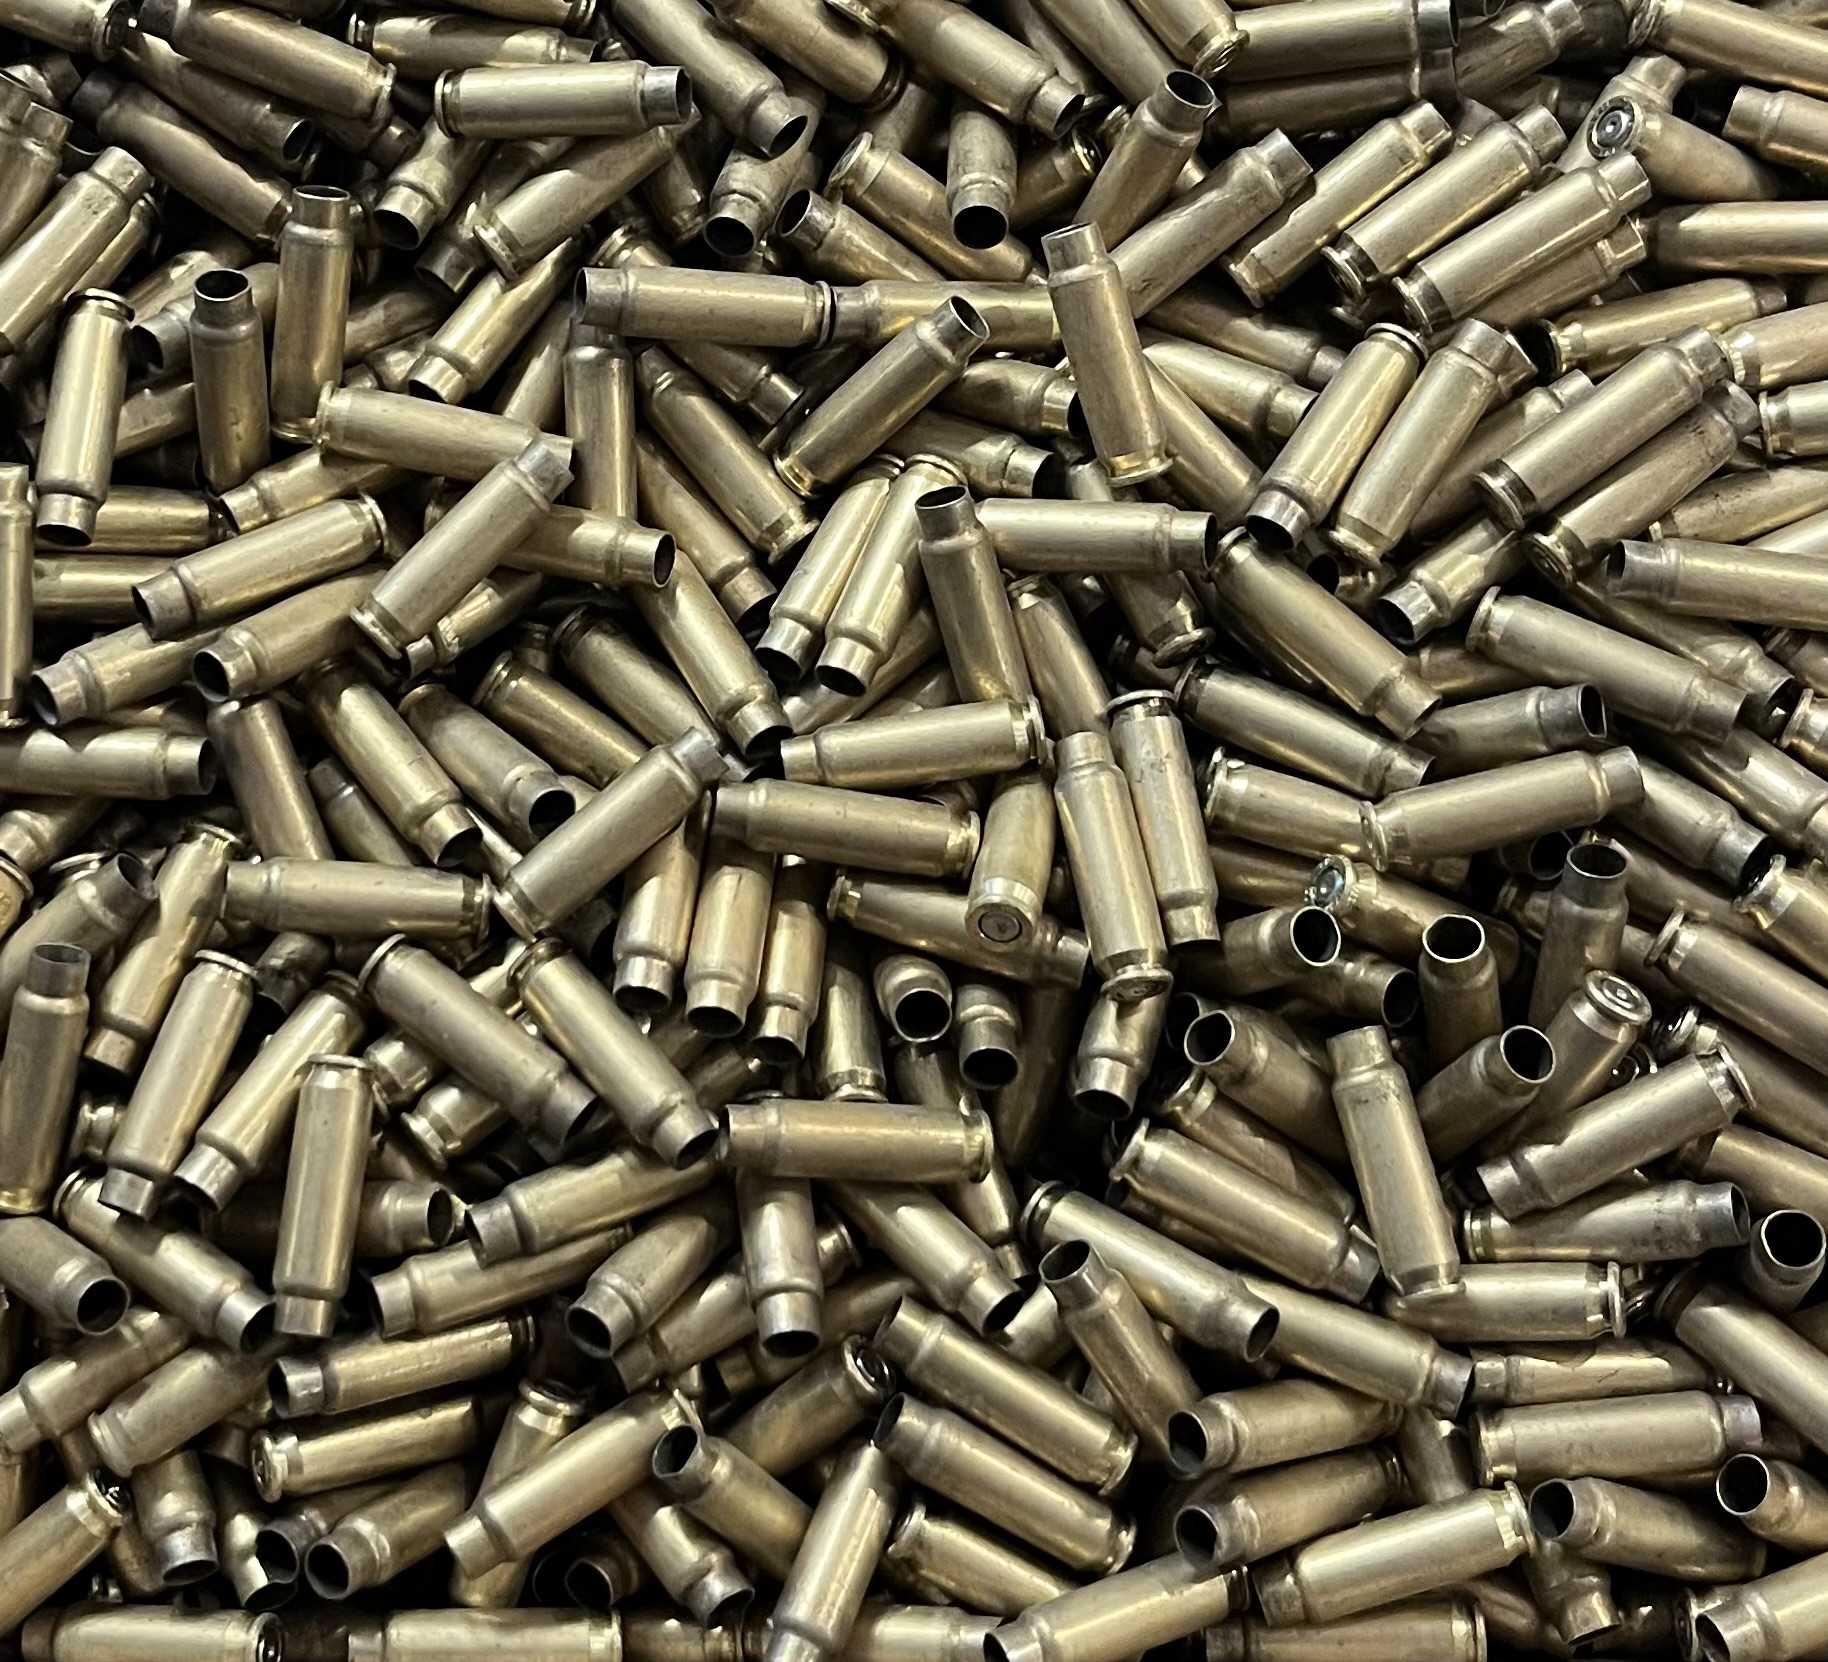 5.7x28 Bulk Brass Cases - 1000 Pieces - Uncleaned To Retain Finish - Mixed  Headstamps - FAMILY OWNED AND OPERATED SMALL BUSINESS - FAST SHIPPING!!!